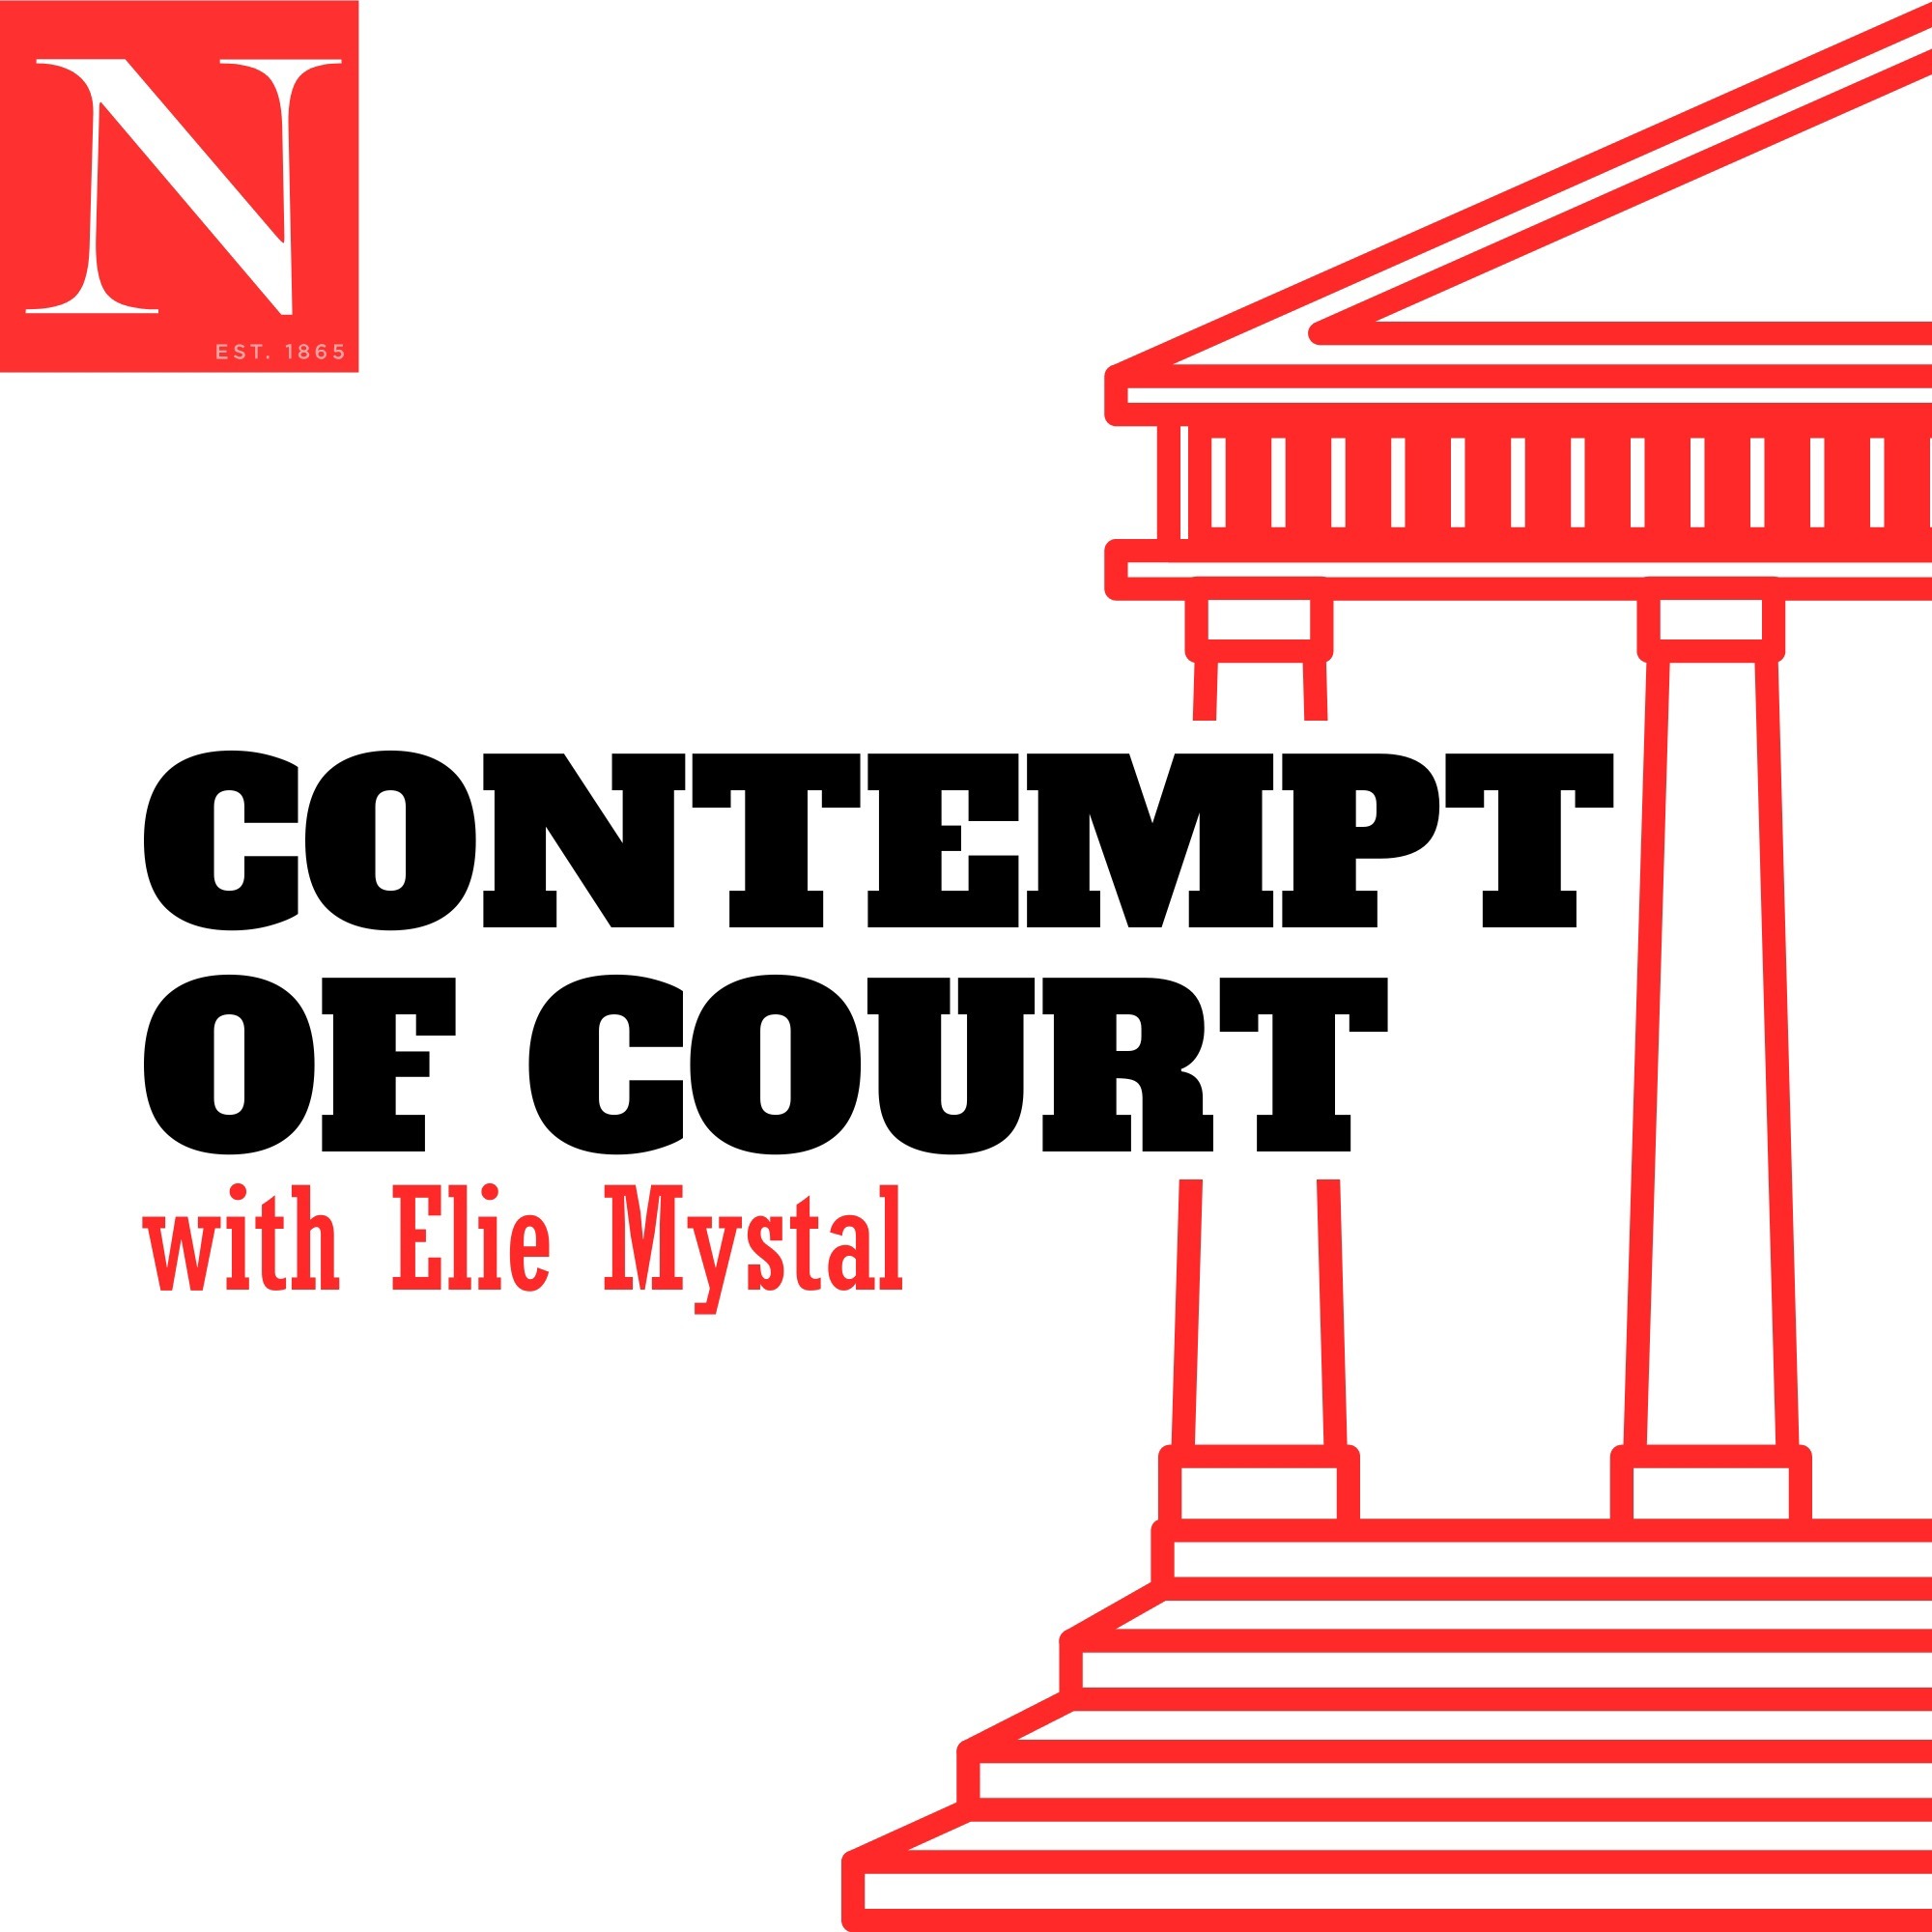 Welcome to Contempt of Court with Elie Mystal!